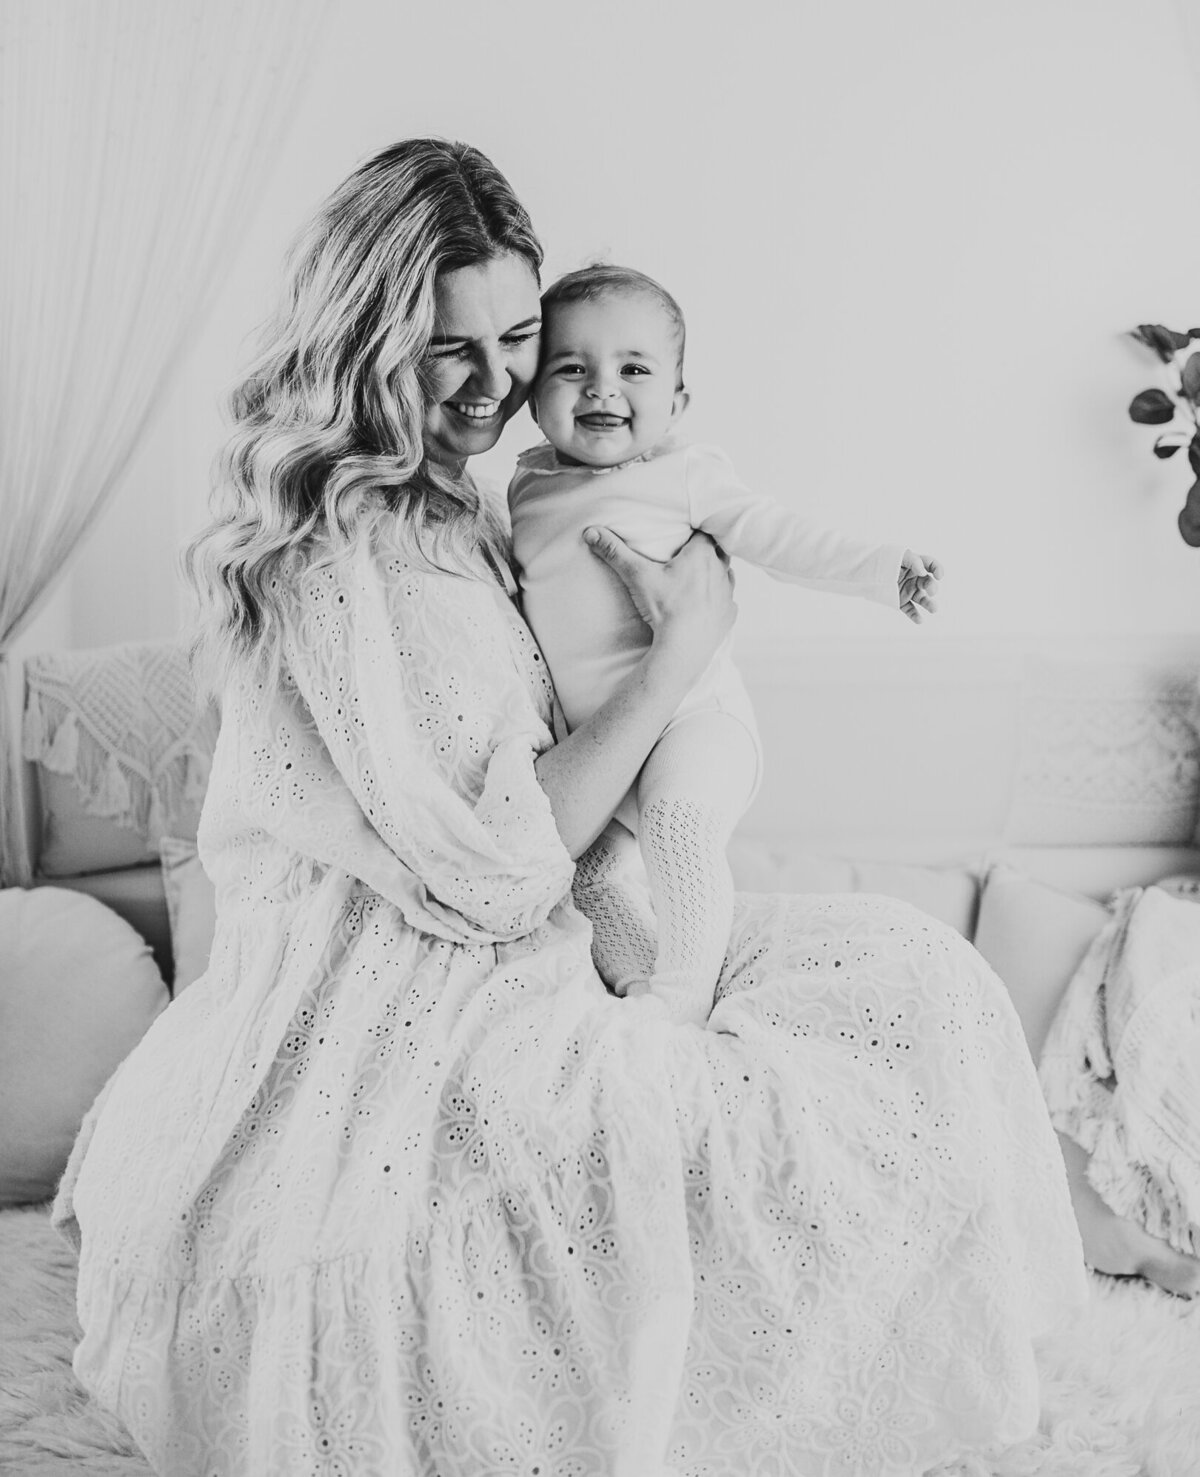 beautiful mum and baby photographer Perth session, embracing and loving each other | gracie and the Wren